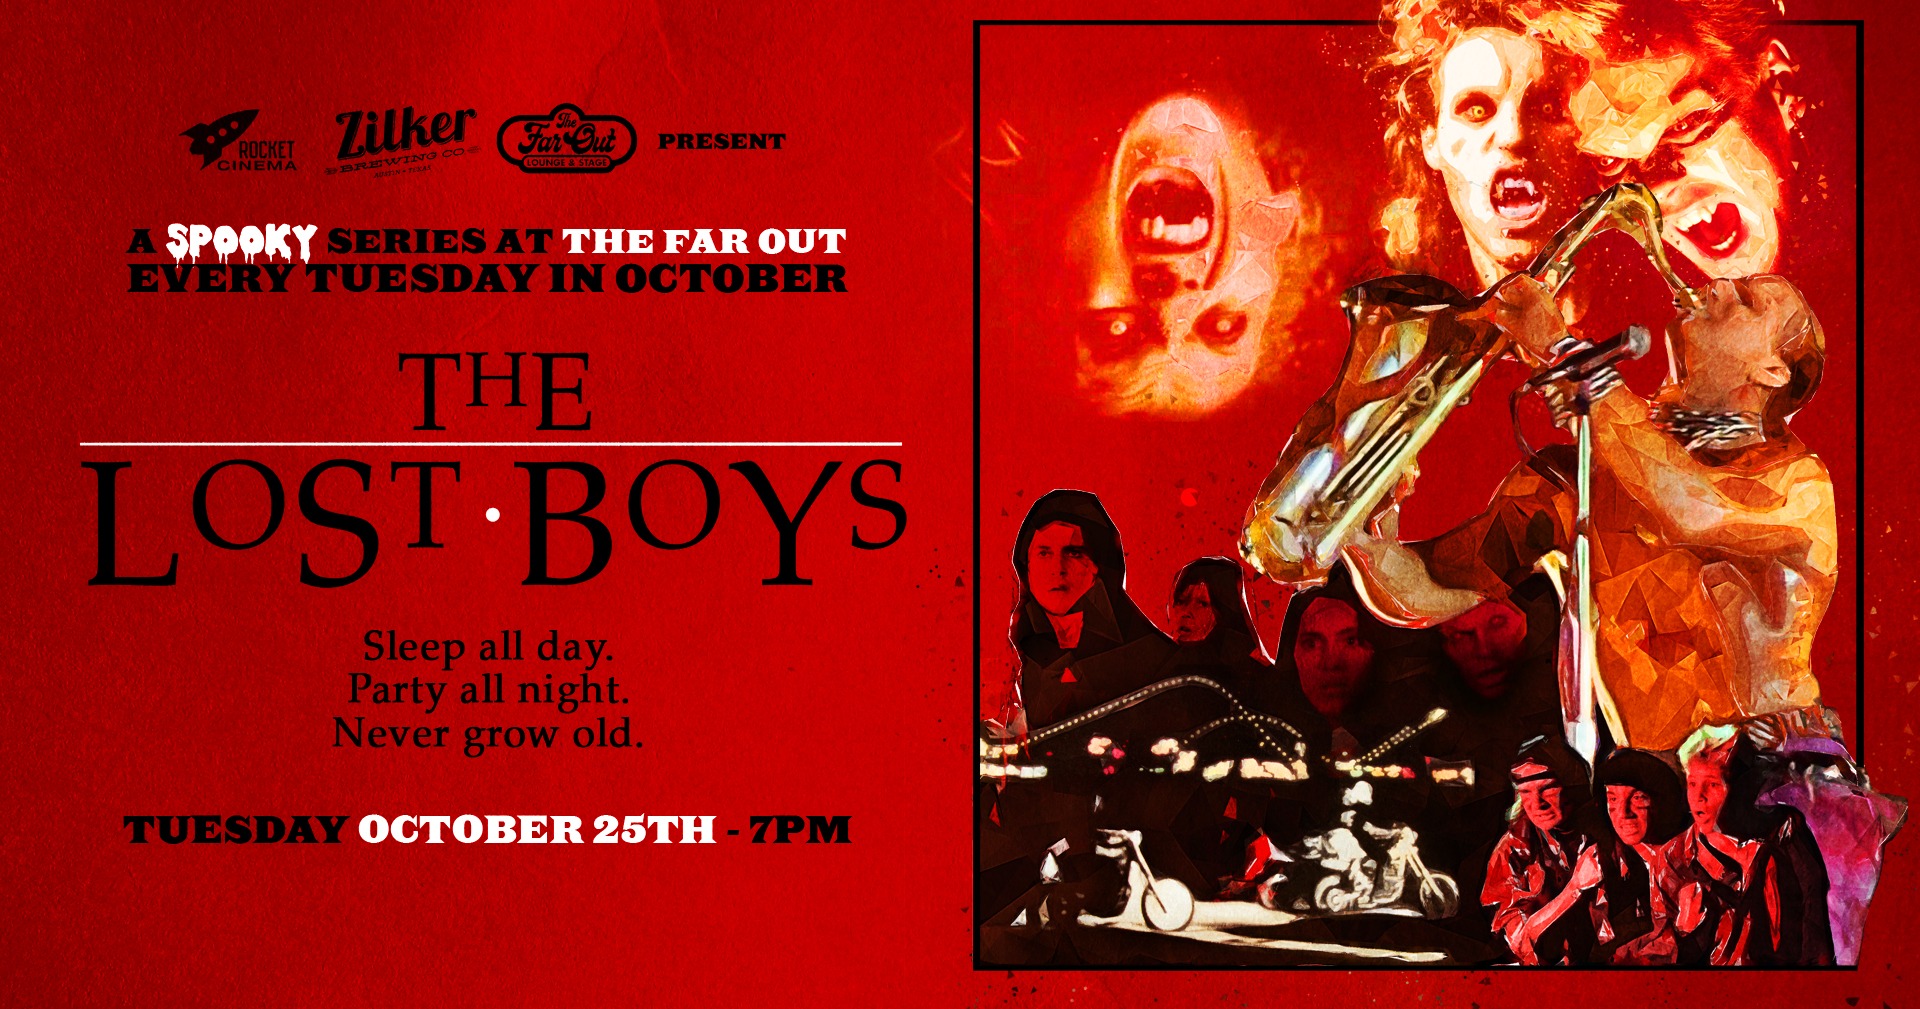 A Spooky Series at The Far Out: THE LOST BOYS